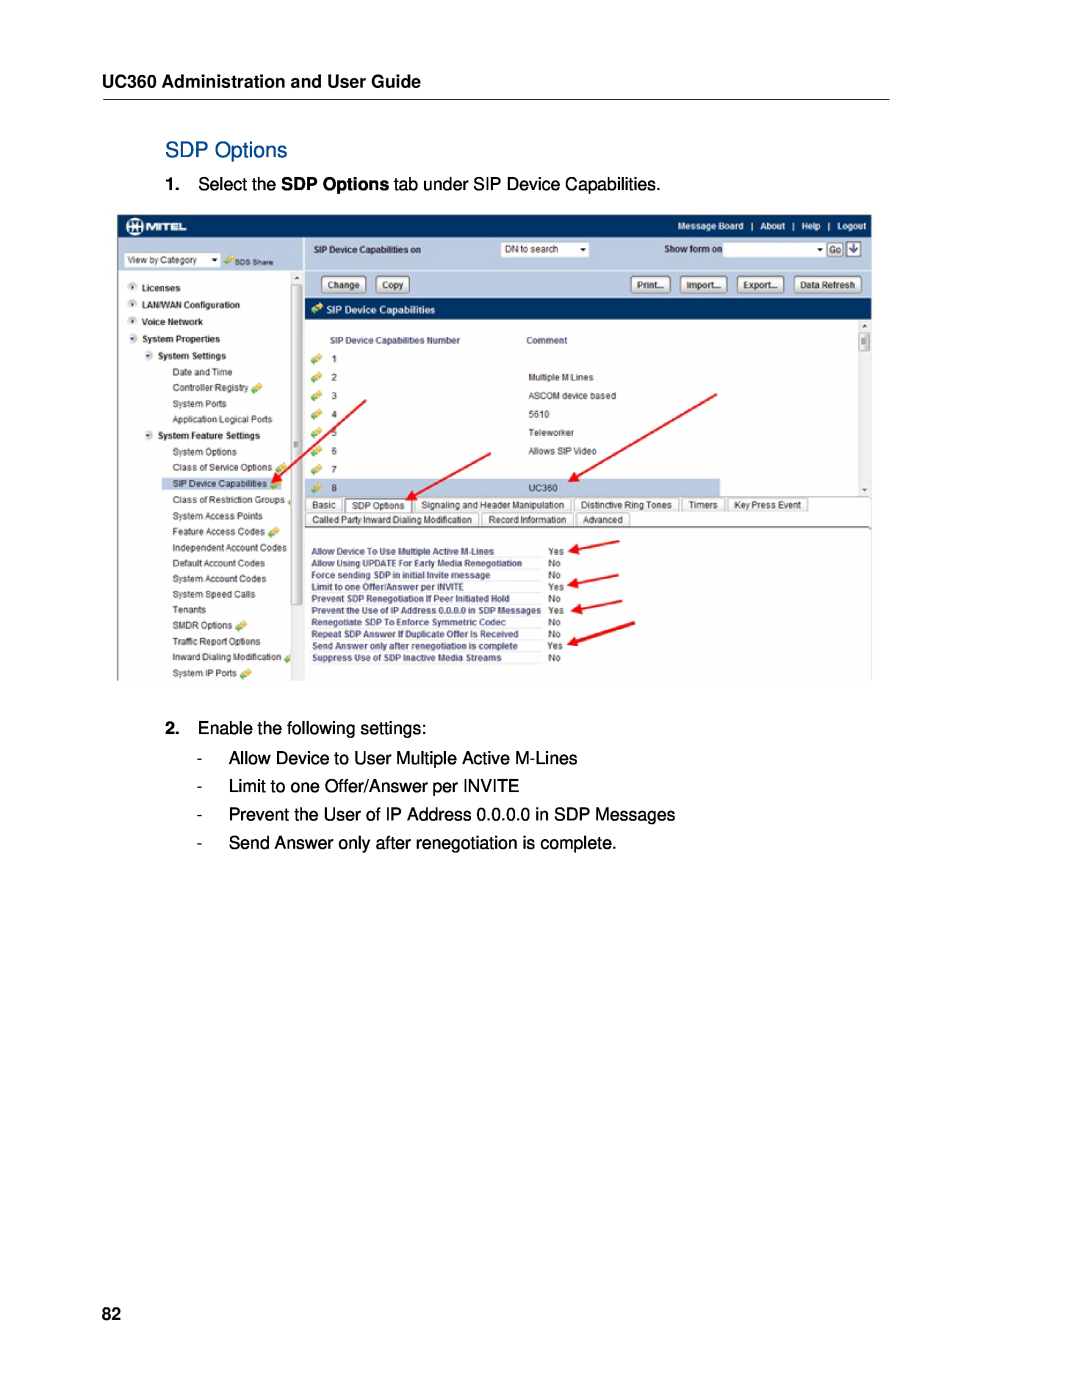 Mitel manual UC360 Administration and User Guide, Select the SDP Options tab under SIP Device Capabilities 